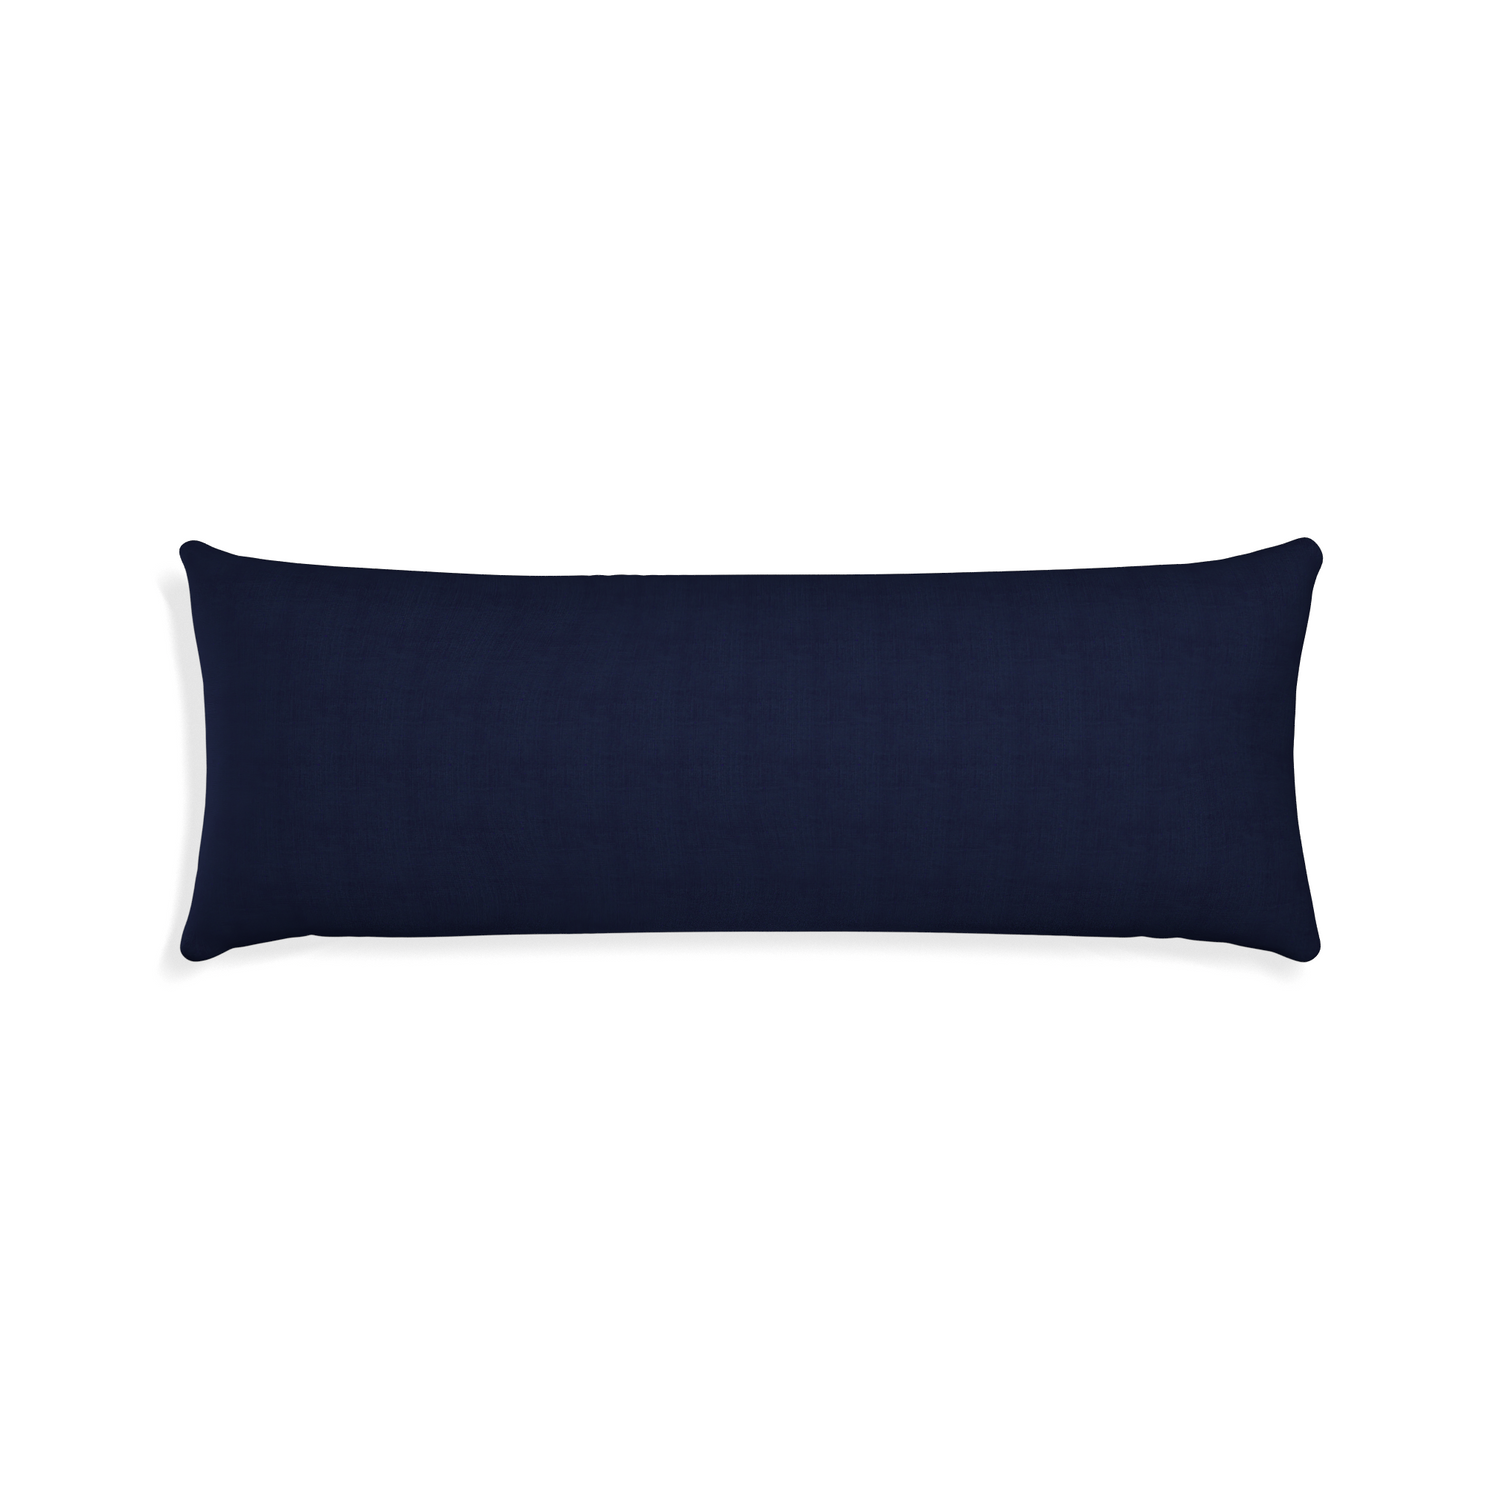 Xl-lumbar midnight custom pillow with none on white background